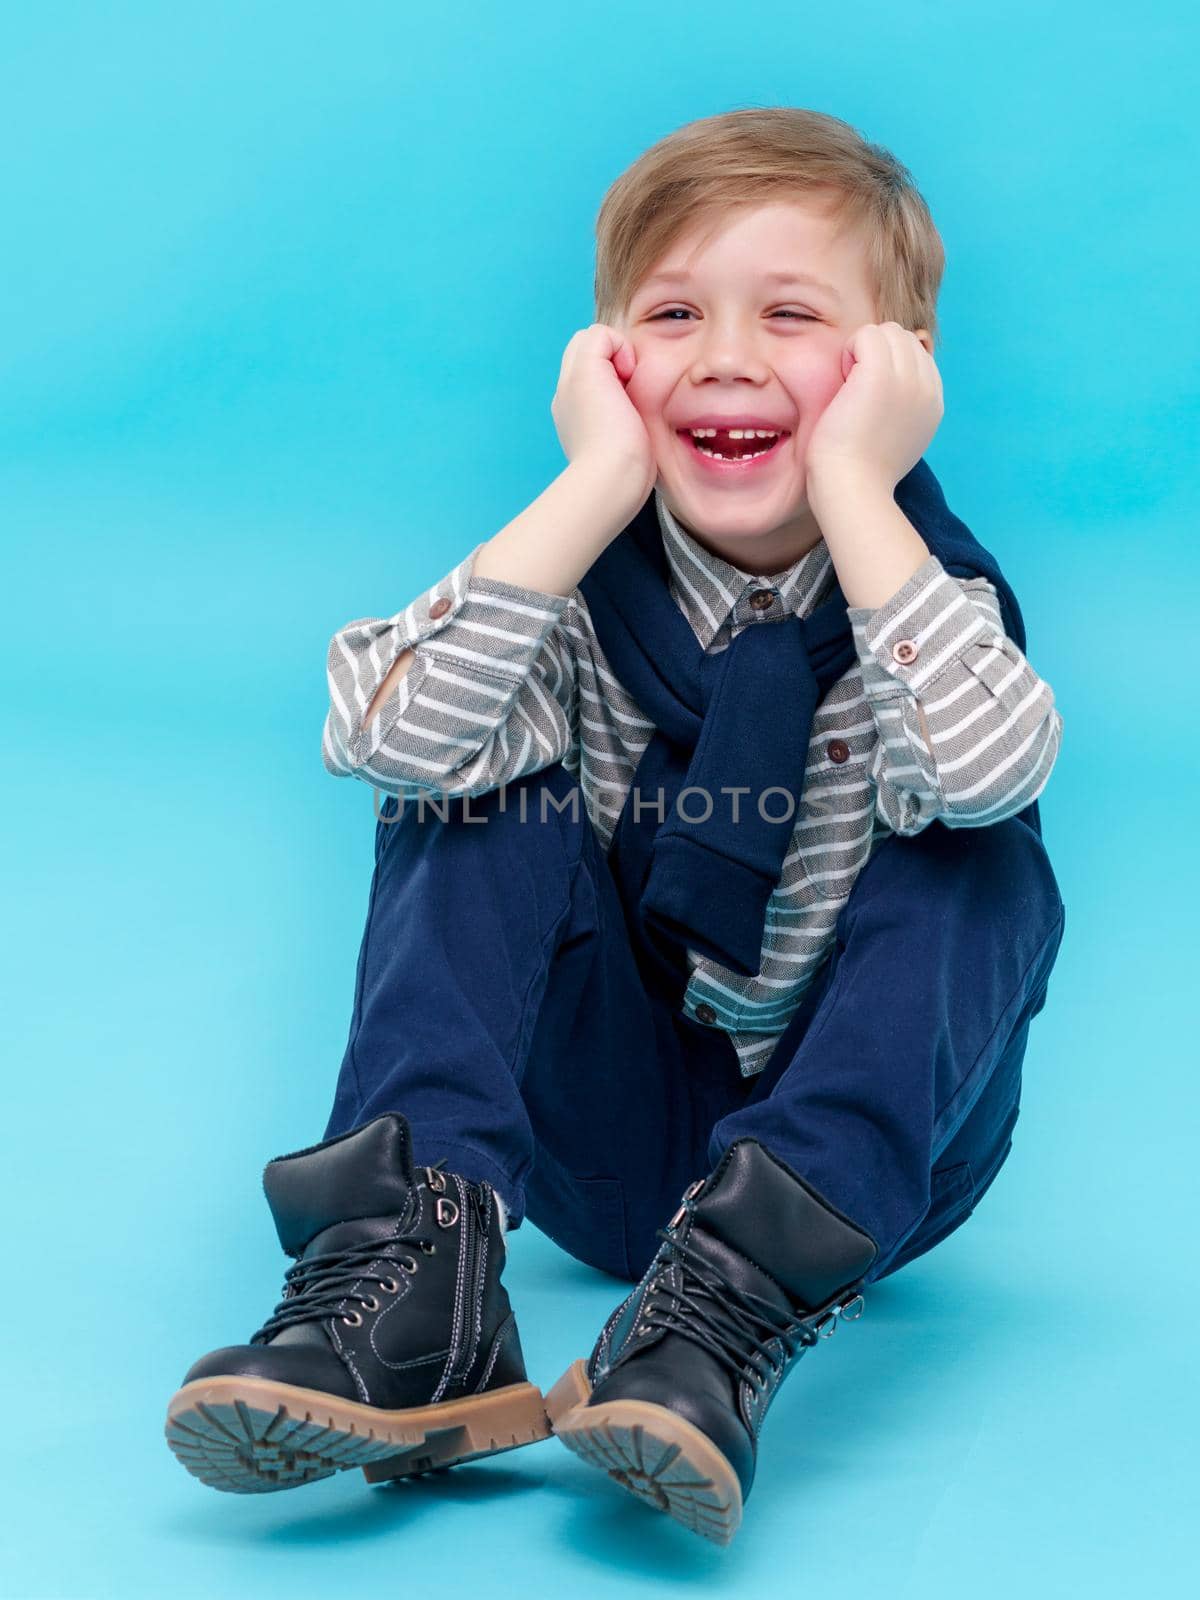 A beautiful little boy laughs fun. The concept of a happy childhood, well-being and family values.